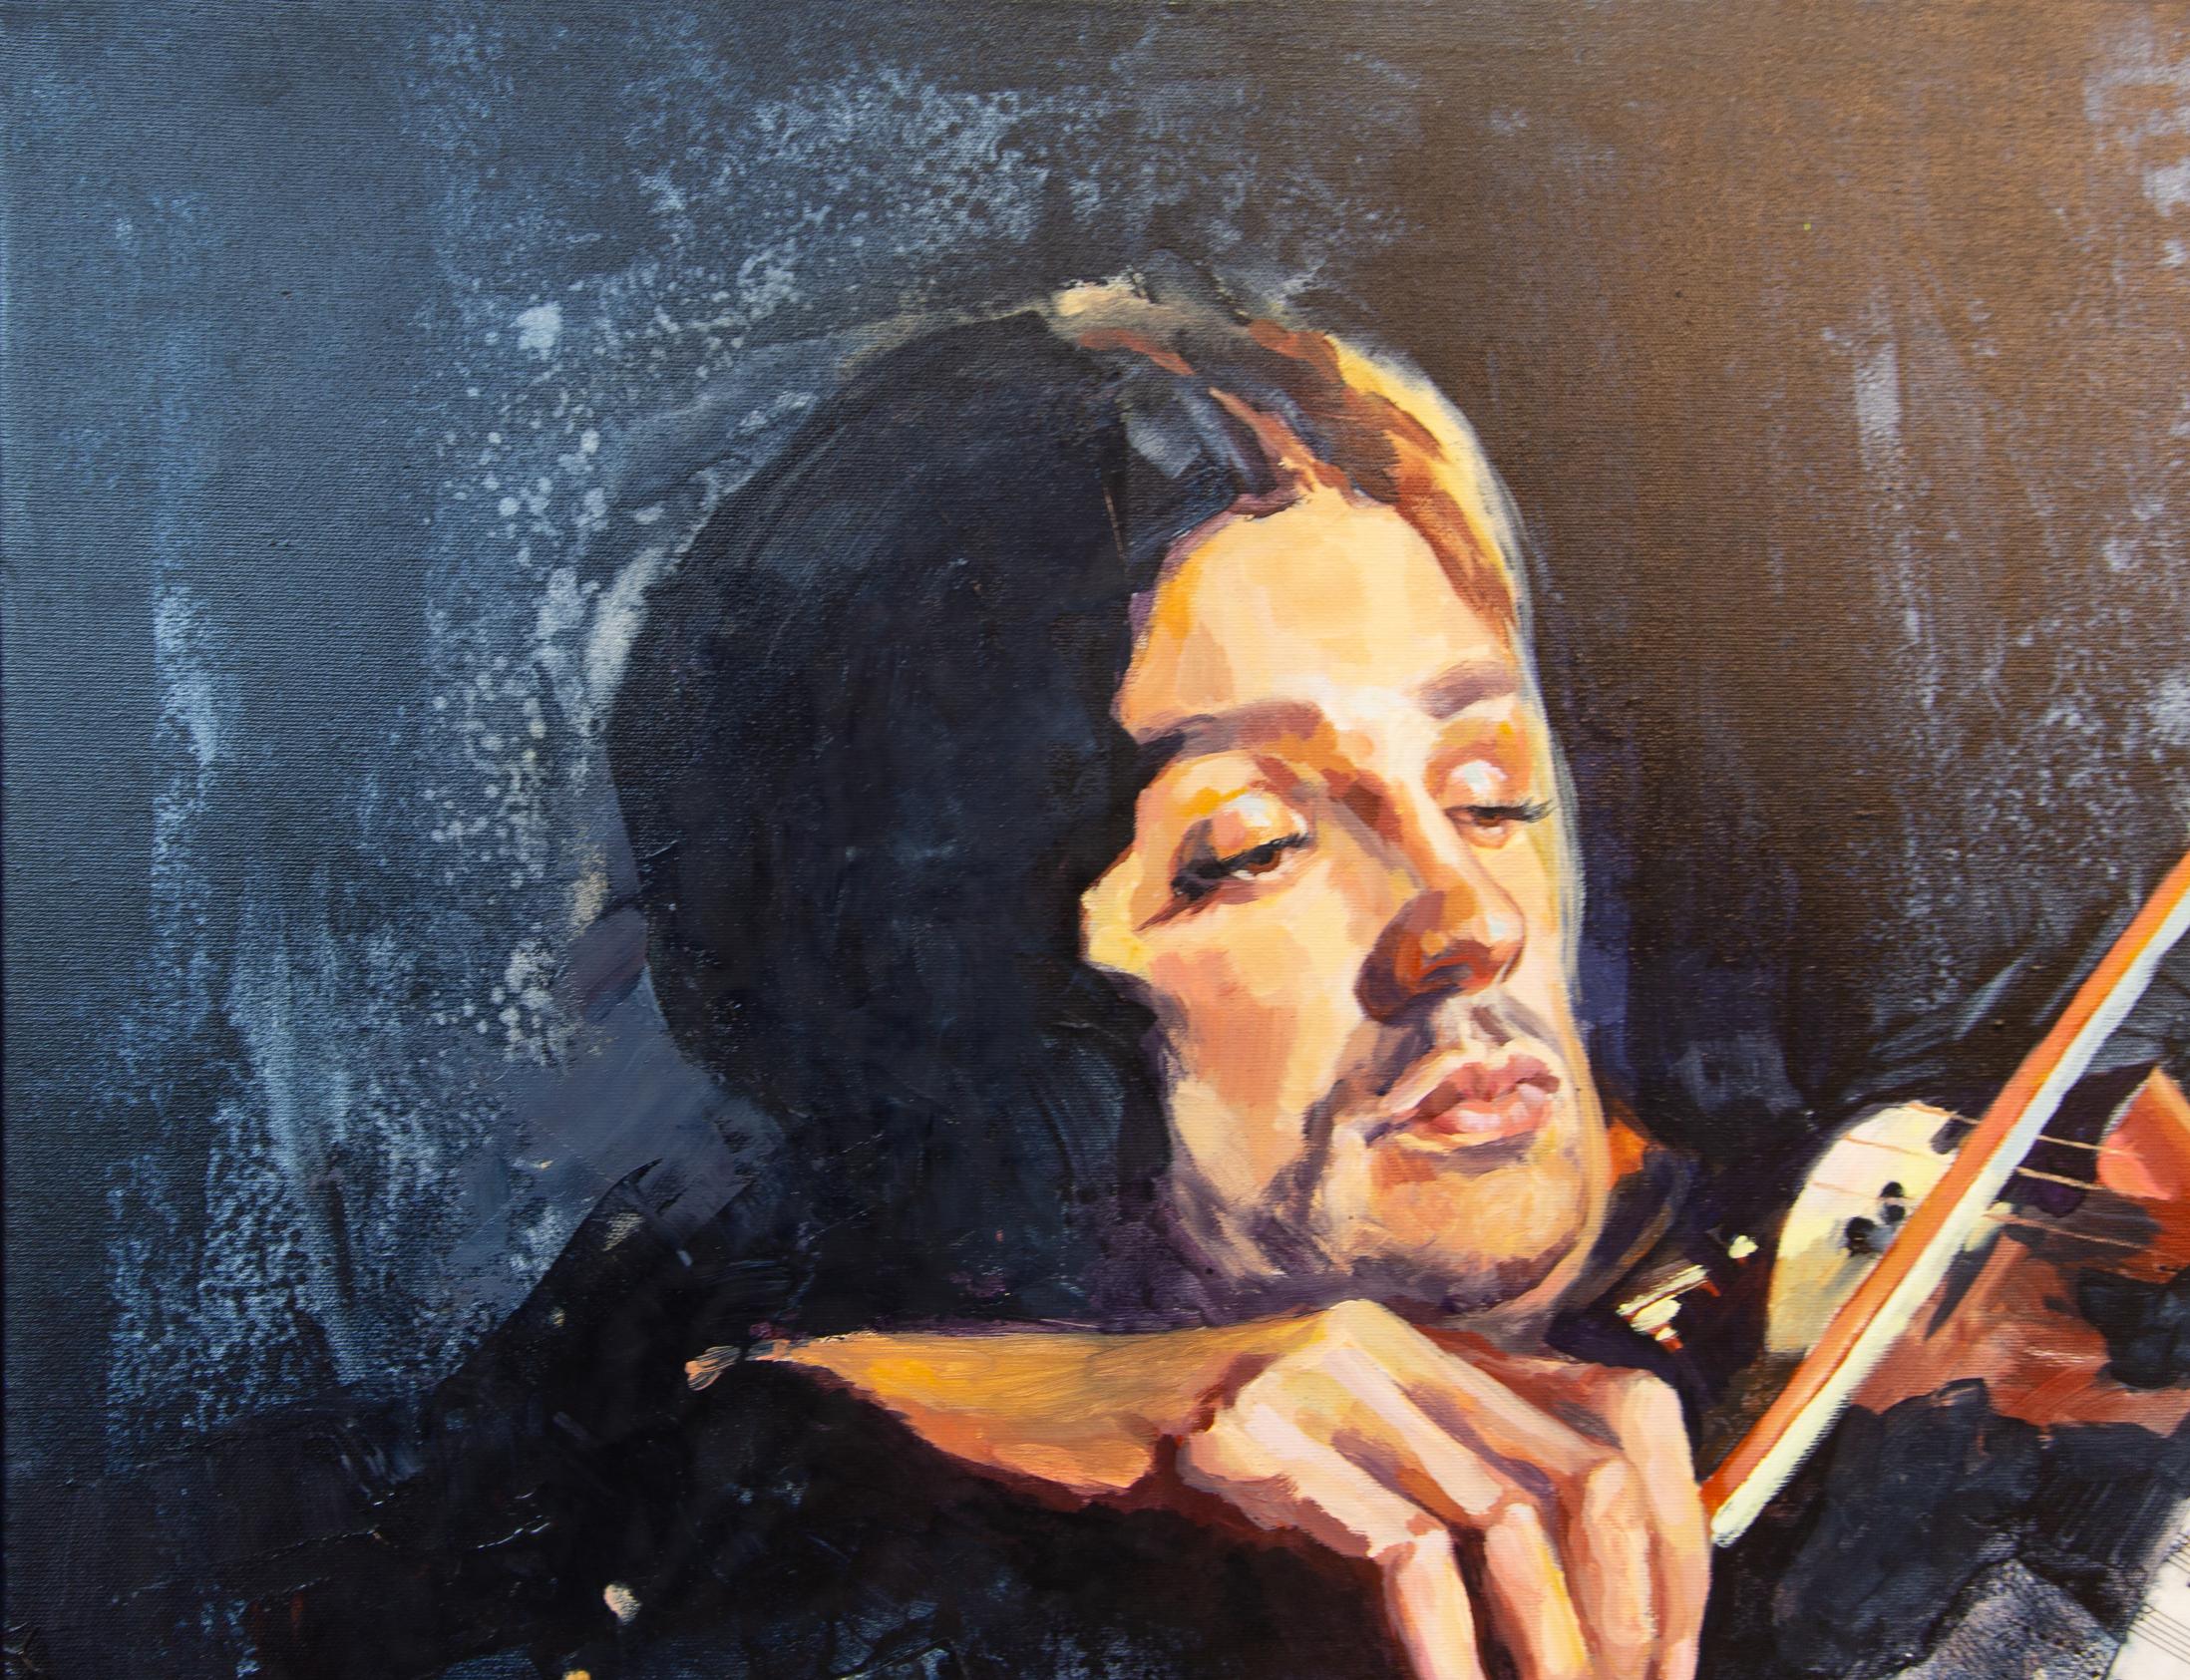 The painting “Violinist” was created in 2009, when the career of the world famous pianist David Garrett was just beginning. I saw in the magazine his small photograph from a concert. I was struck by his emotionality and unusual appearance. I came up